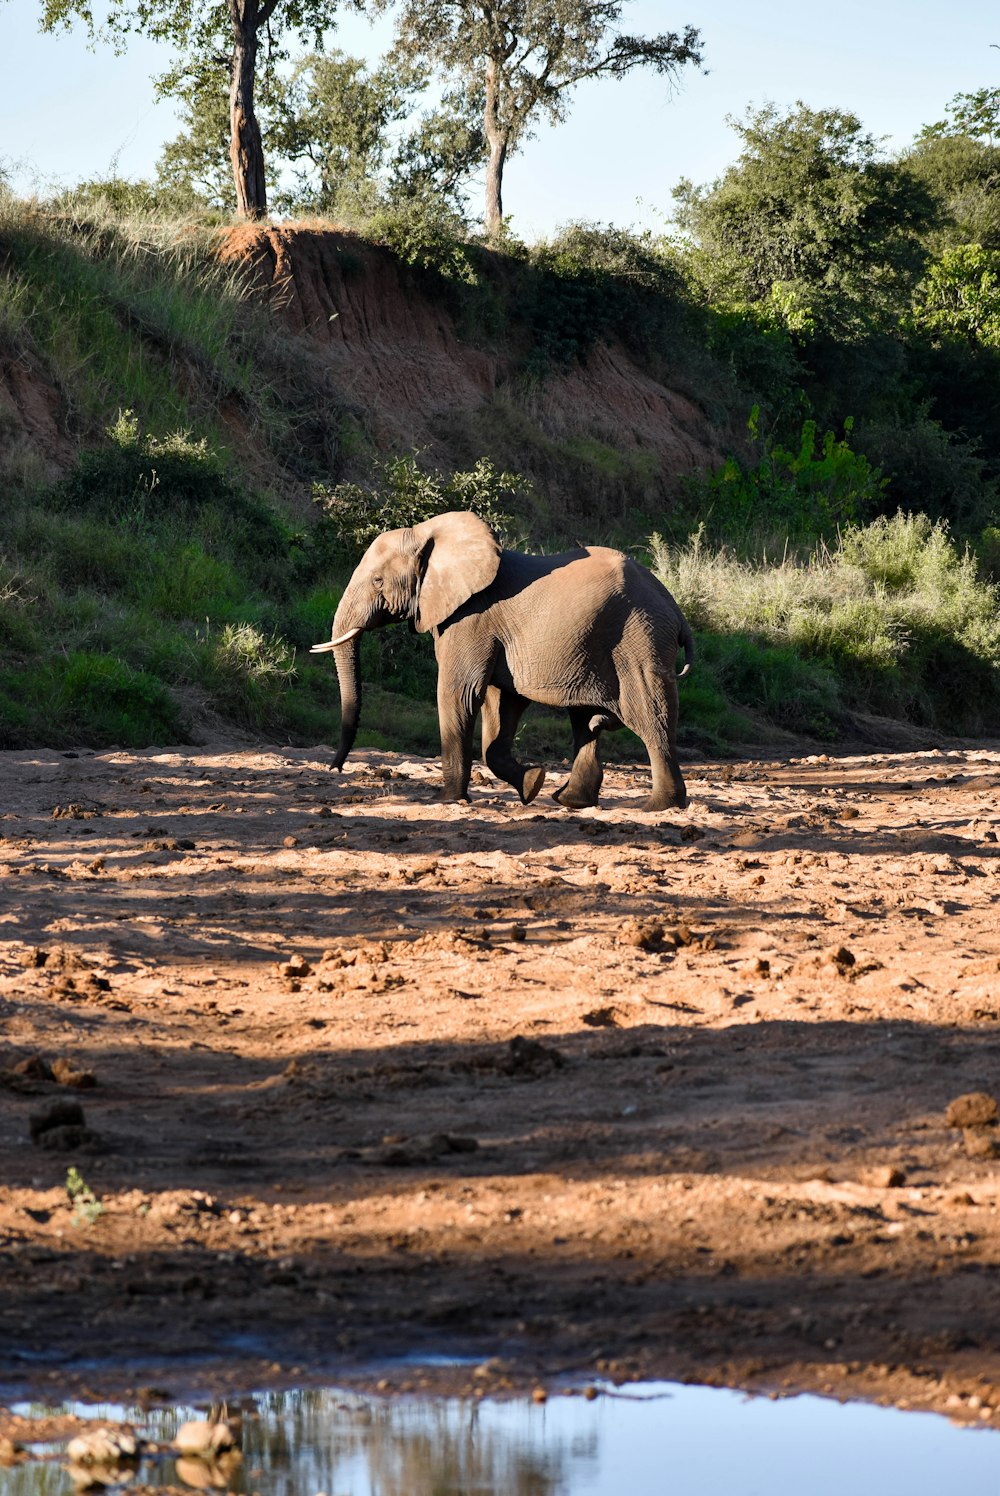 gray elephant walking on brown sand during daytime